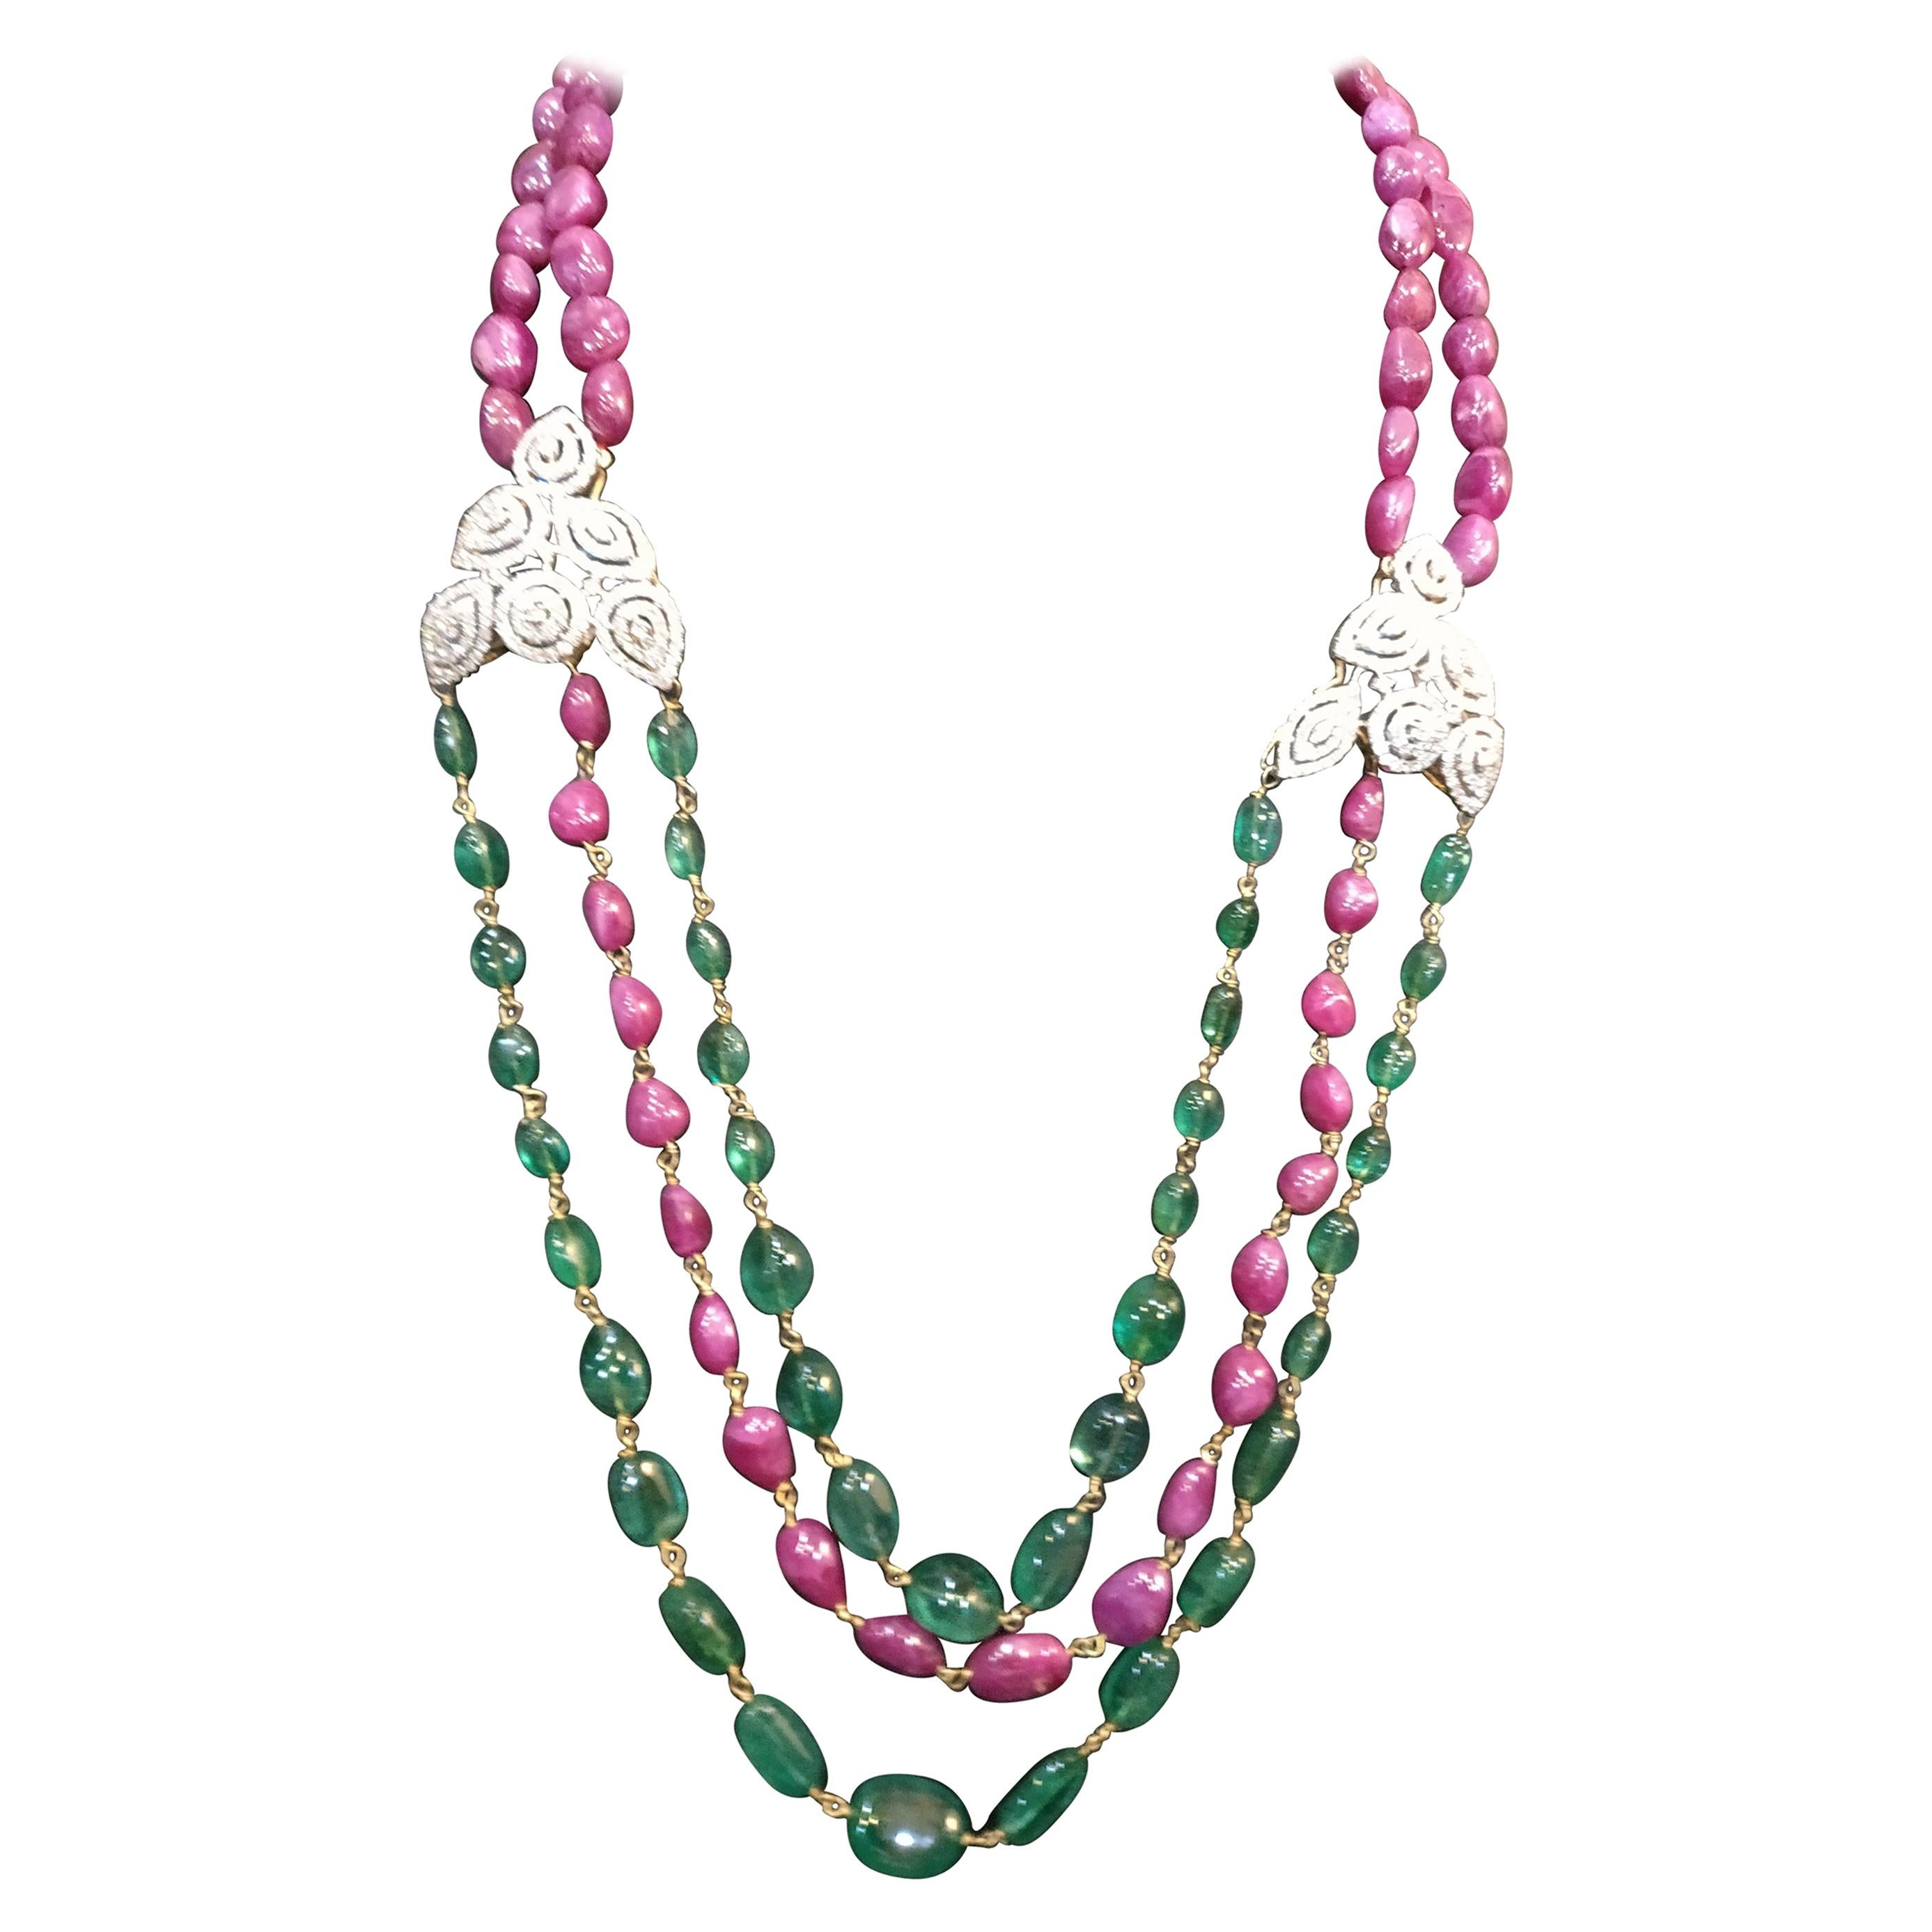 Antique handmade necklace. Really unique with good transparent emerald
200 carats of ruby and 100 carat of emerald beads woven in 18 carat yellow gold
Shoulder part has beautiful diamond patterns made with 10 carat diamonds (5 on each side)
The